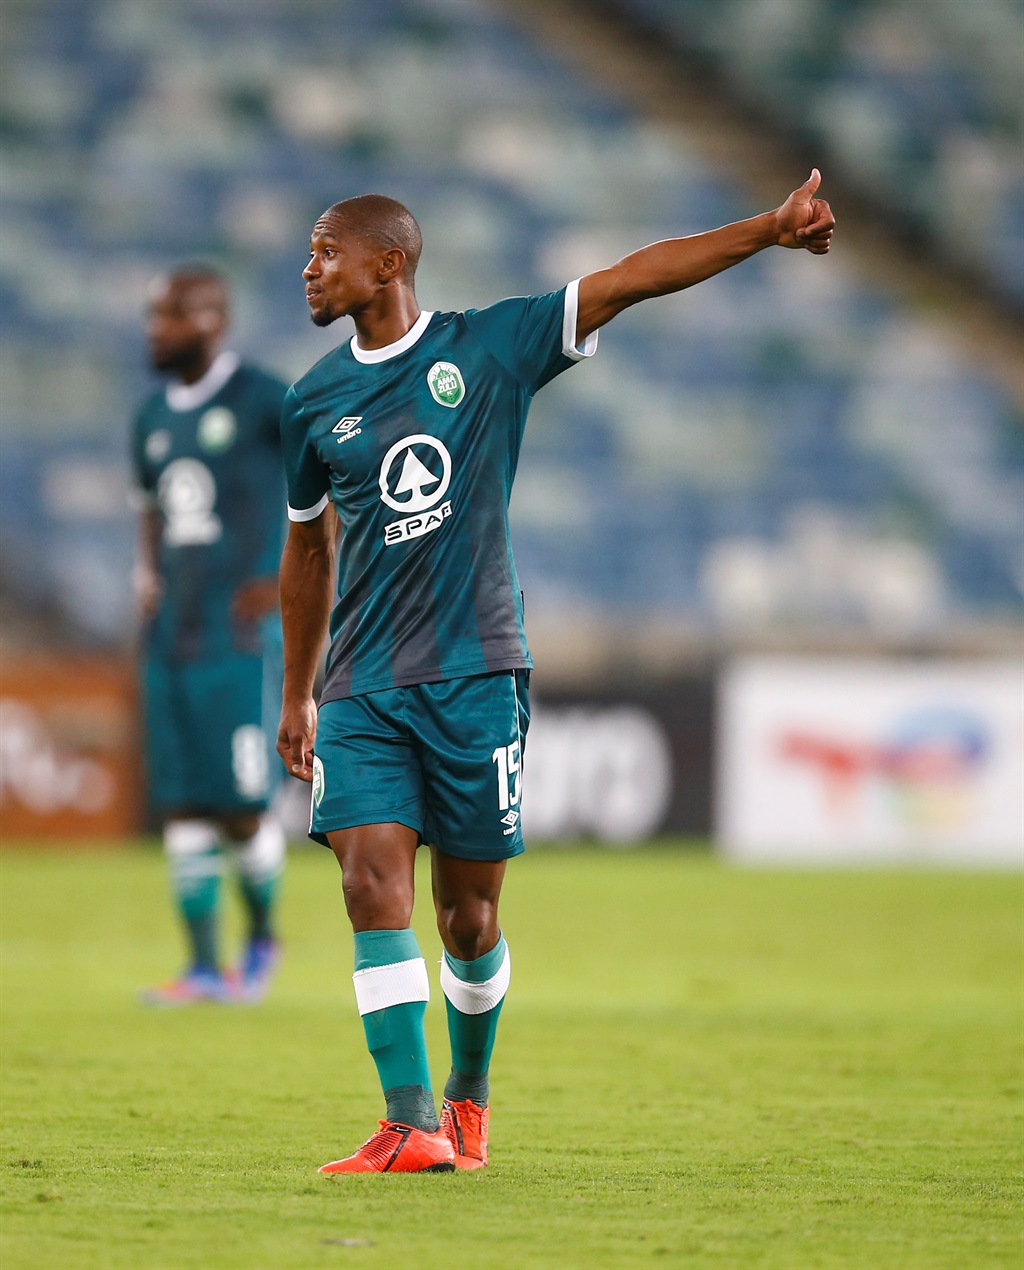 DURBAN, SOUTH AFRICA - FEBRUARY 18: Thabo Qalinge of AmaZulu during the CAF Champions League match between AmaZulu FC and Horoya AC at Moses Mabhida Stadium on February 18, 2022 in Durban, South Africa. (Photo by Steve Haag/Gallo Images)